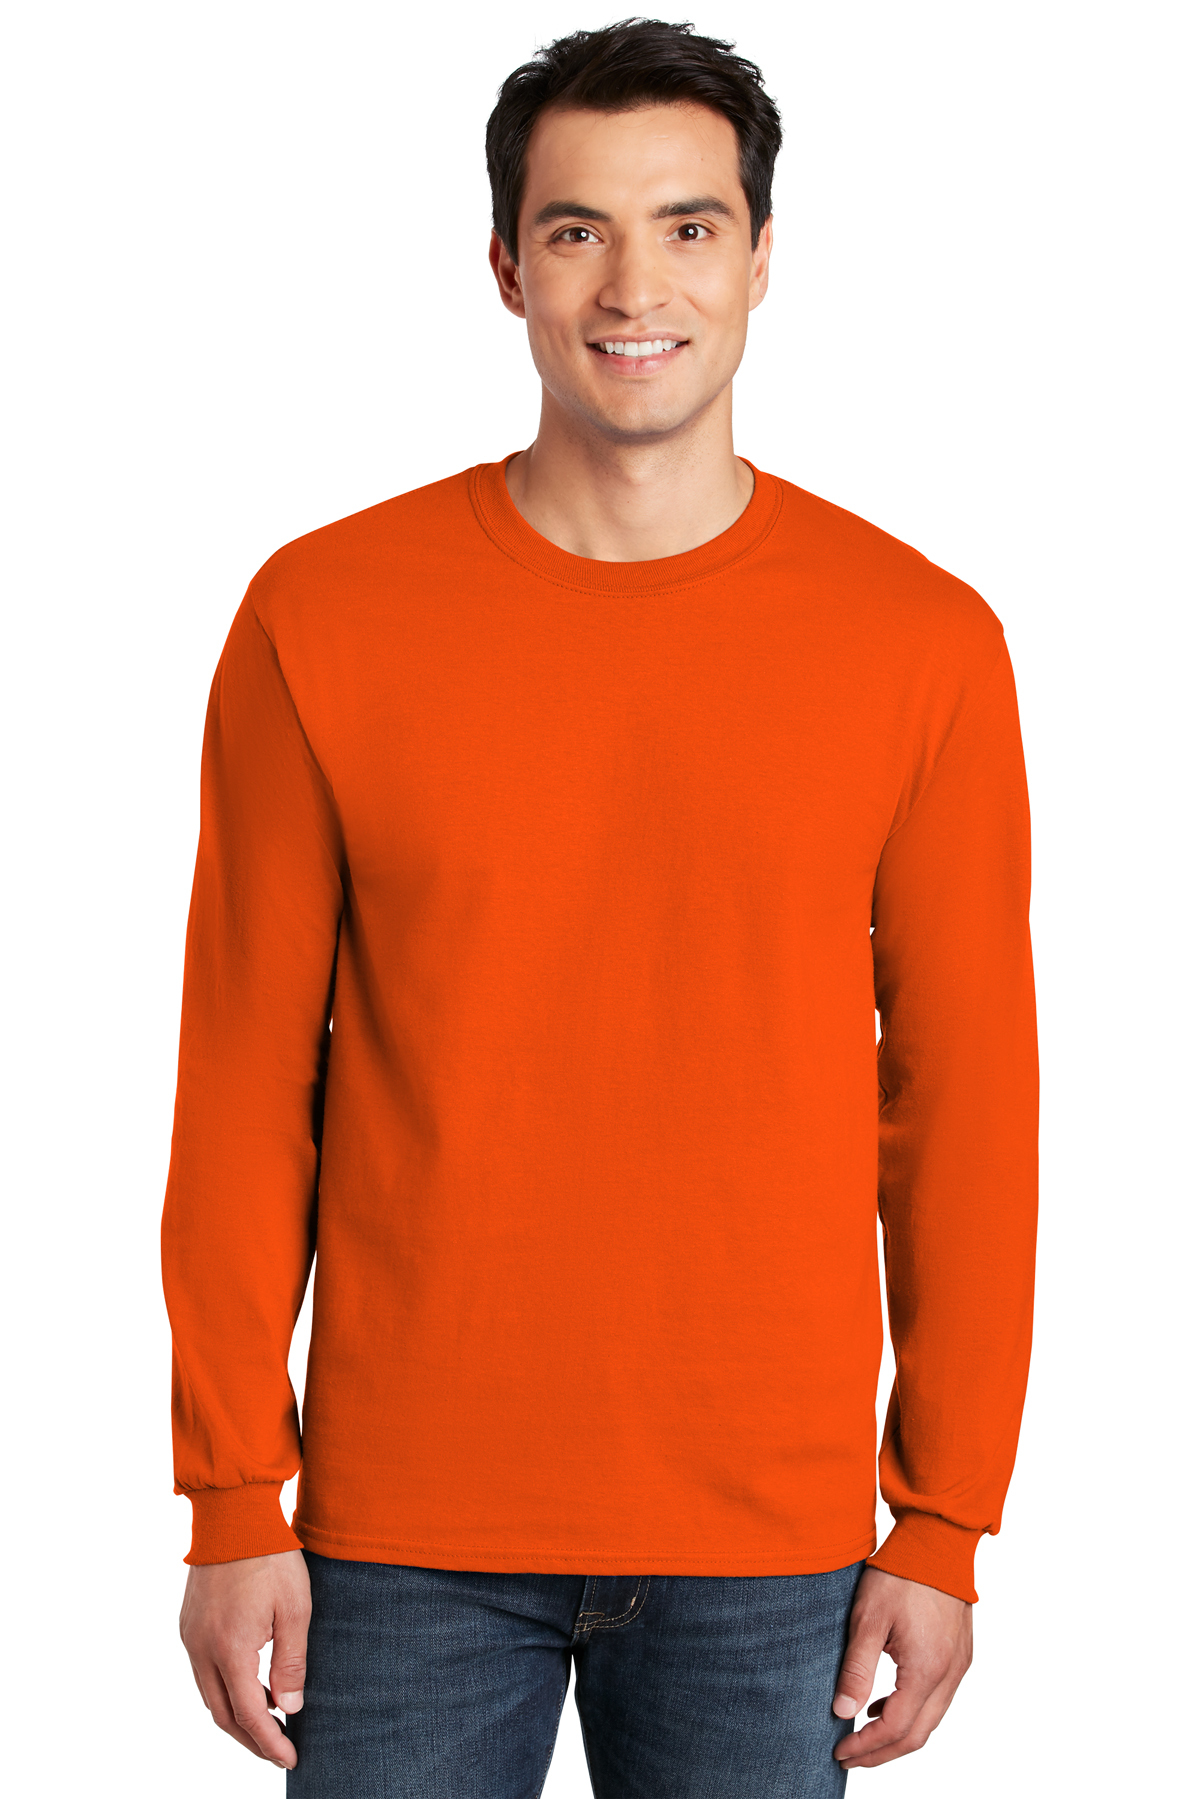 Gildan Men's Embroidered Classic Ultra Cotton Long Sleeve Safety Tee